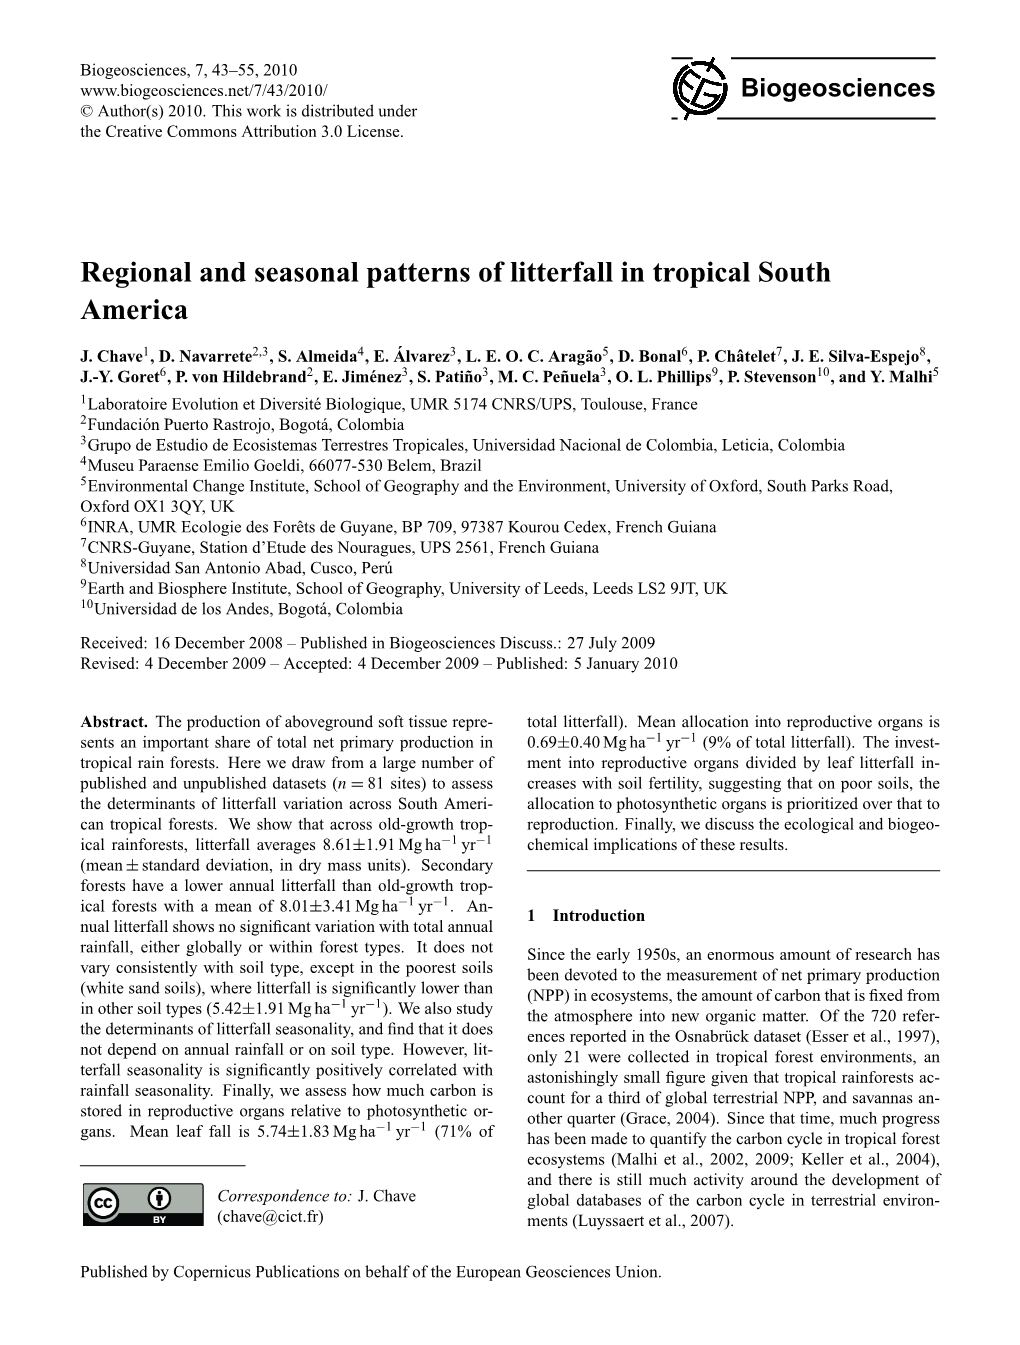 Regional and Seasonal Patterns of Litterfall in Tropical South America